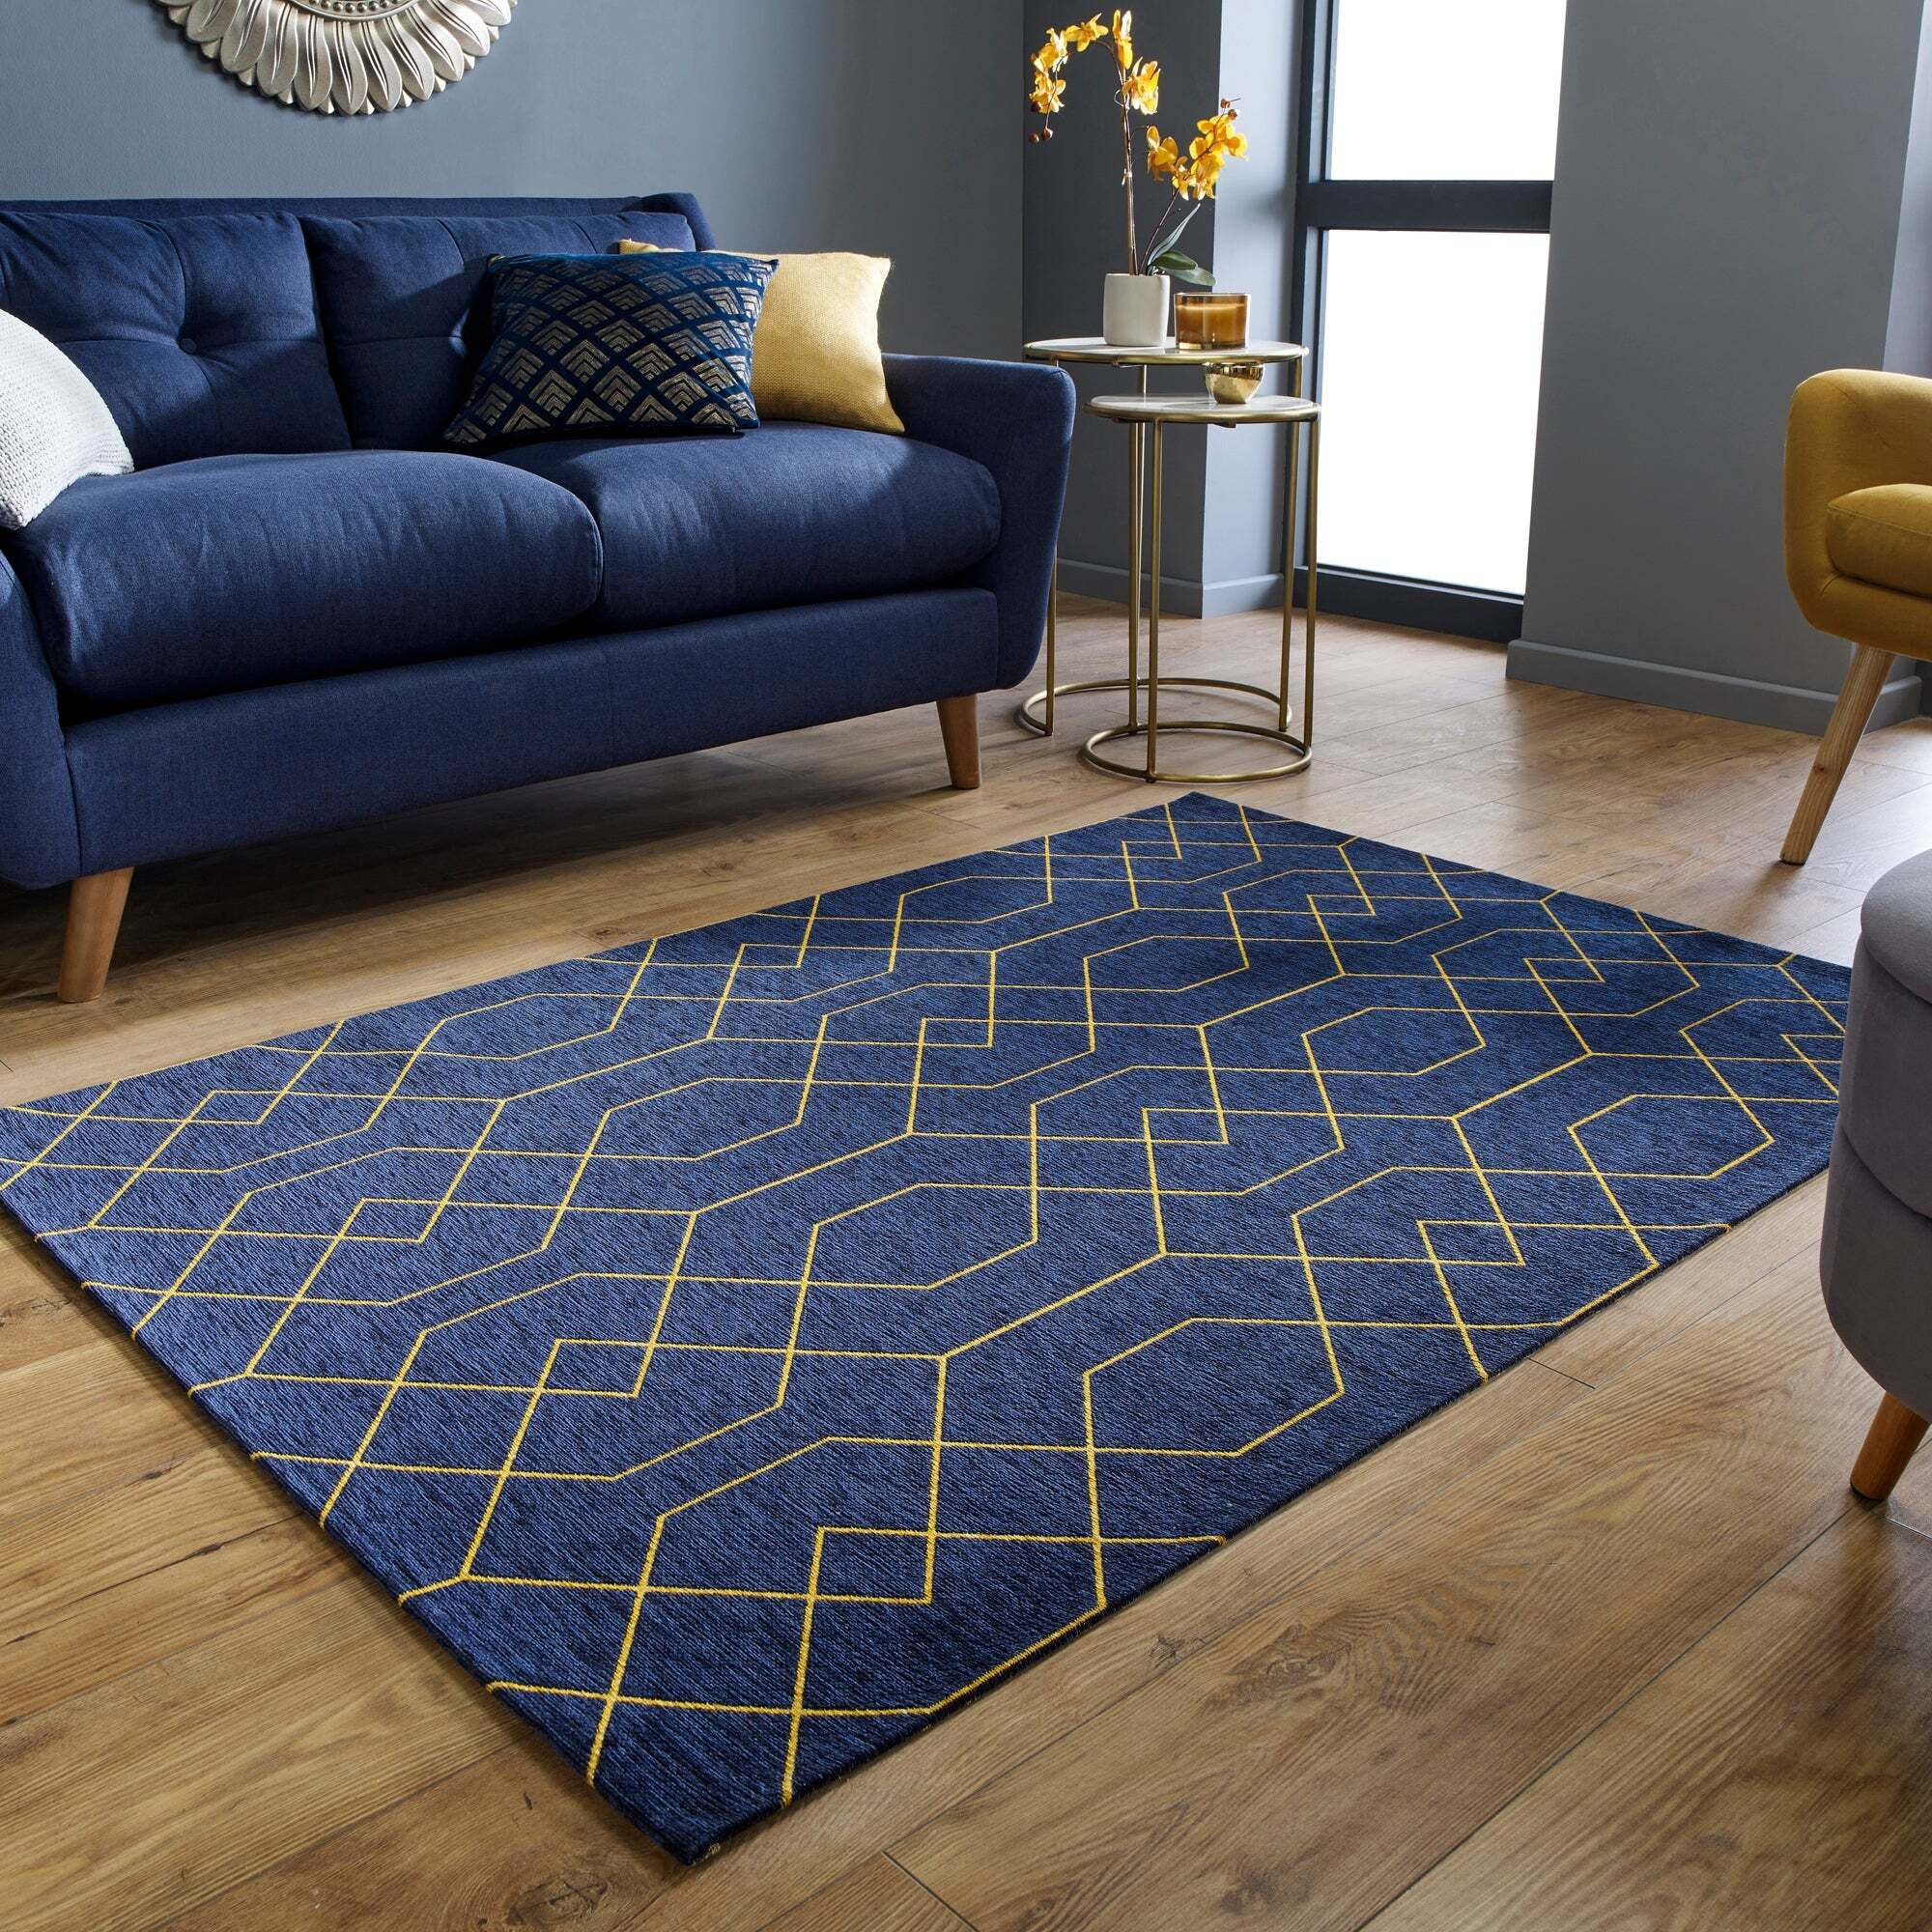 Tokyo Geometric Rug Navy And Yellow By